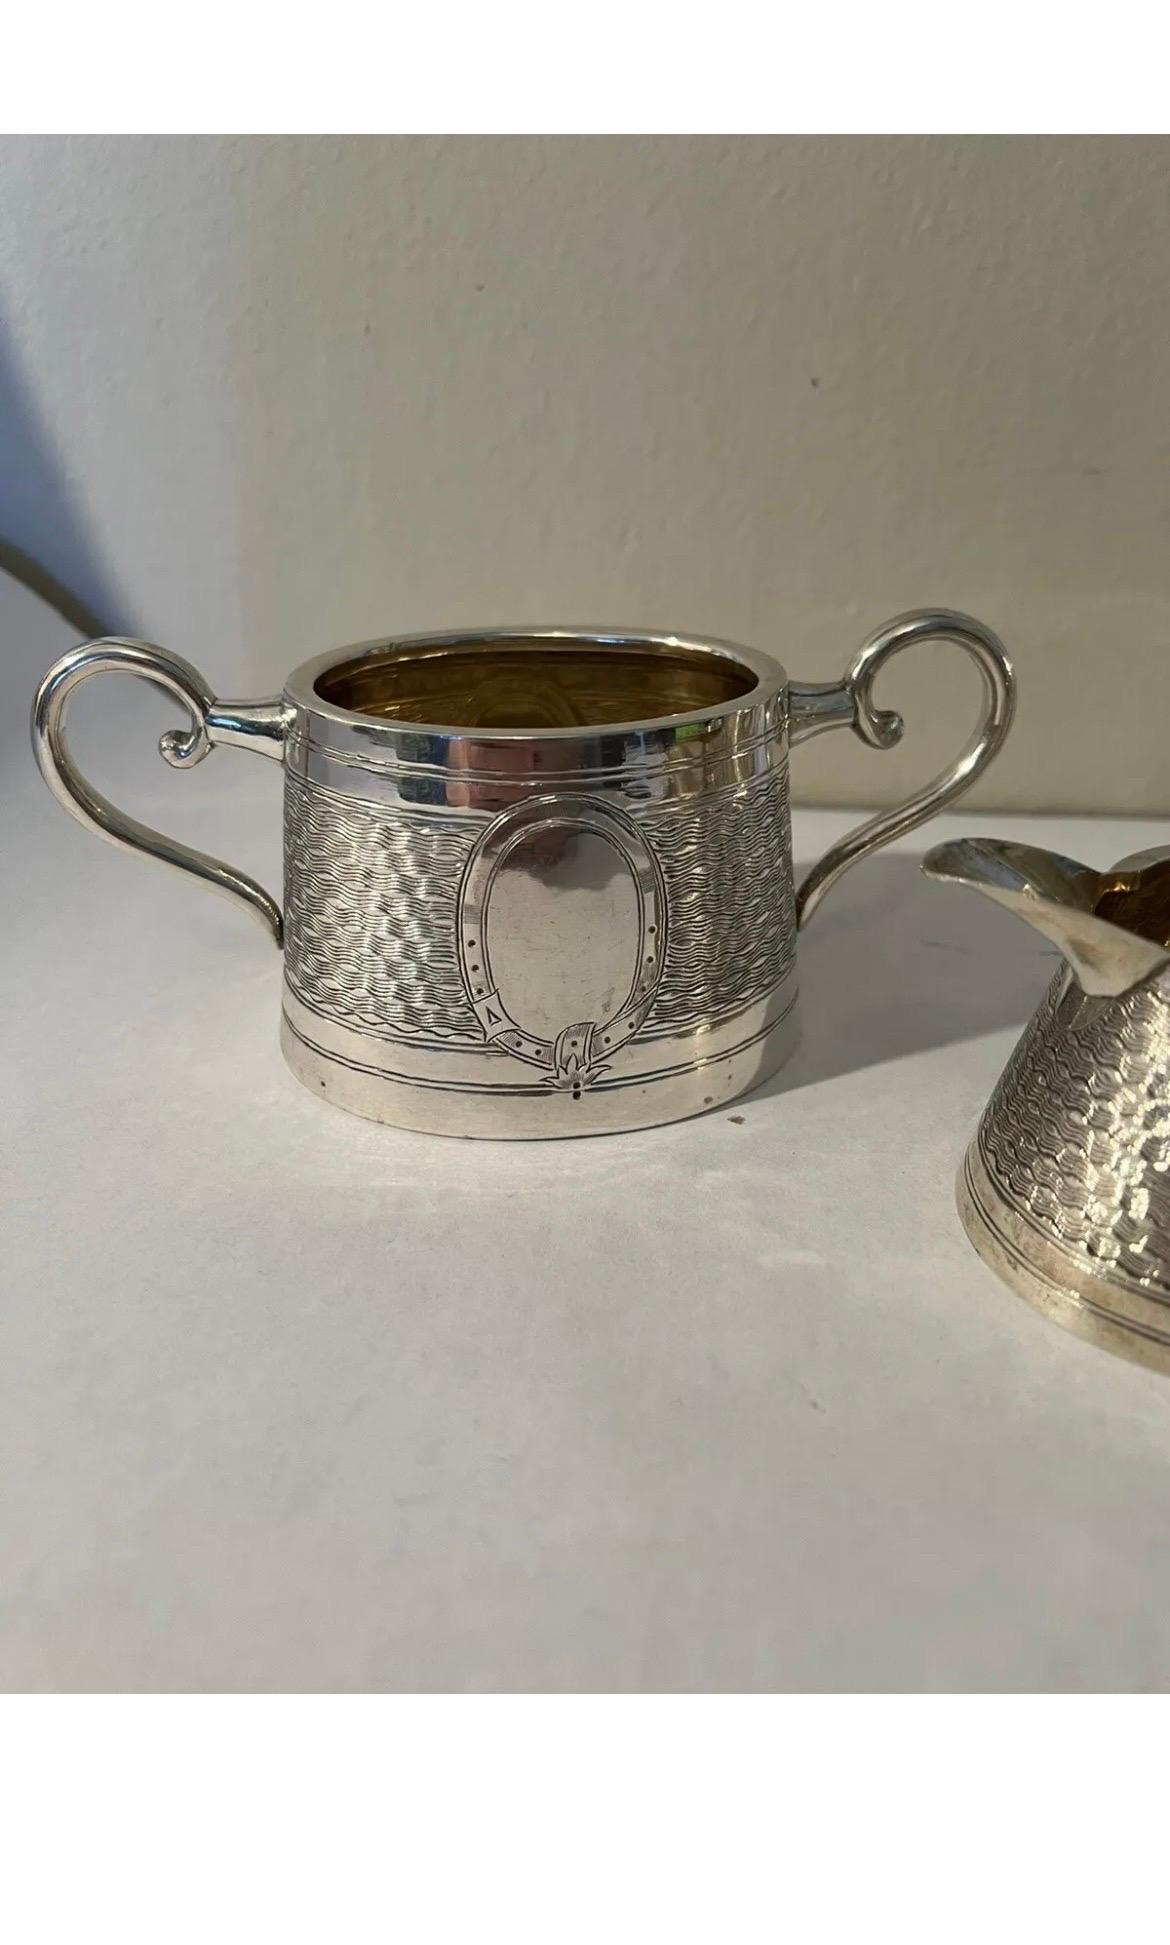 Wang Hing (Chinese, 1854-1941), circa early 20th century. A 3 piece set of Chinese export silver tea service by renounced maker Wang Hing. The set is comprised of a teapot, sugar bowl and creamer. 
<br> Marked to underside 